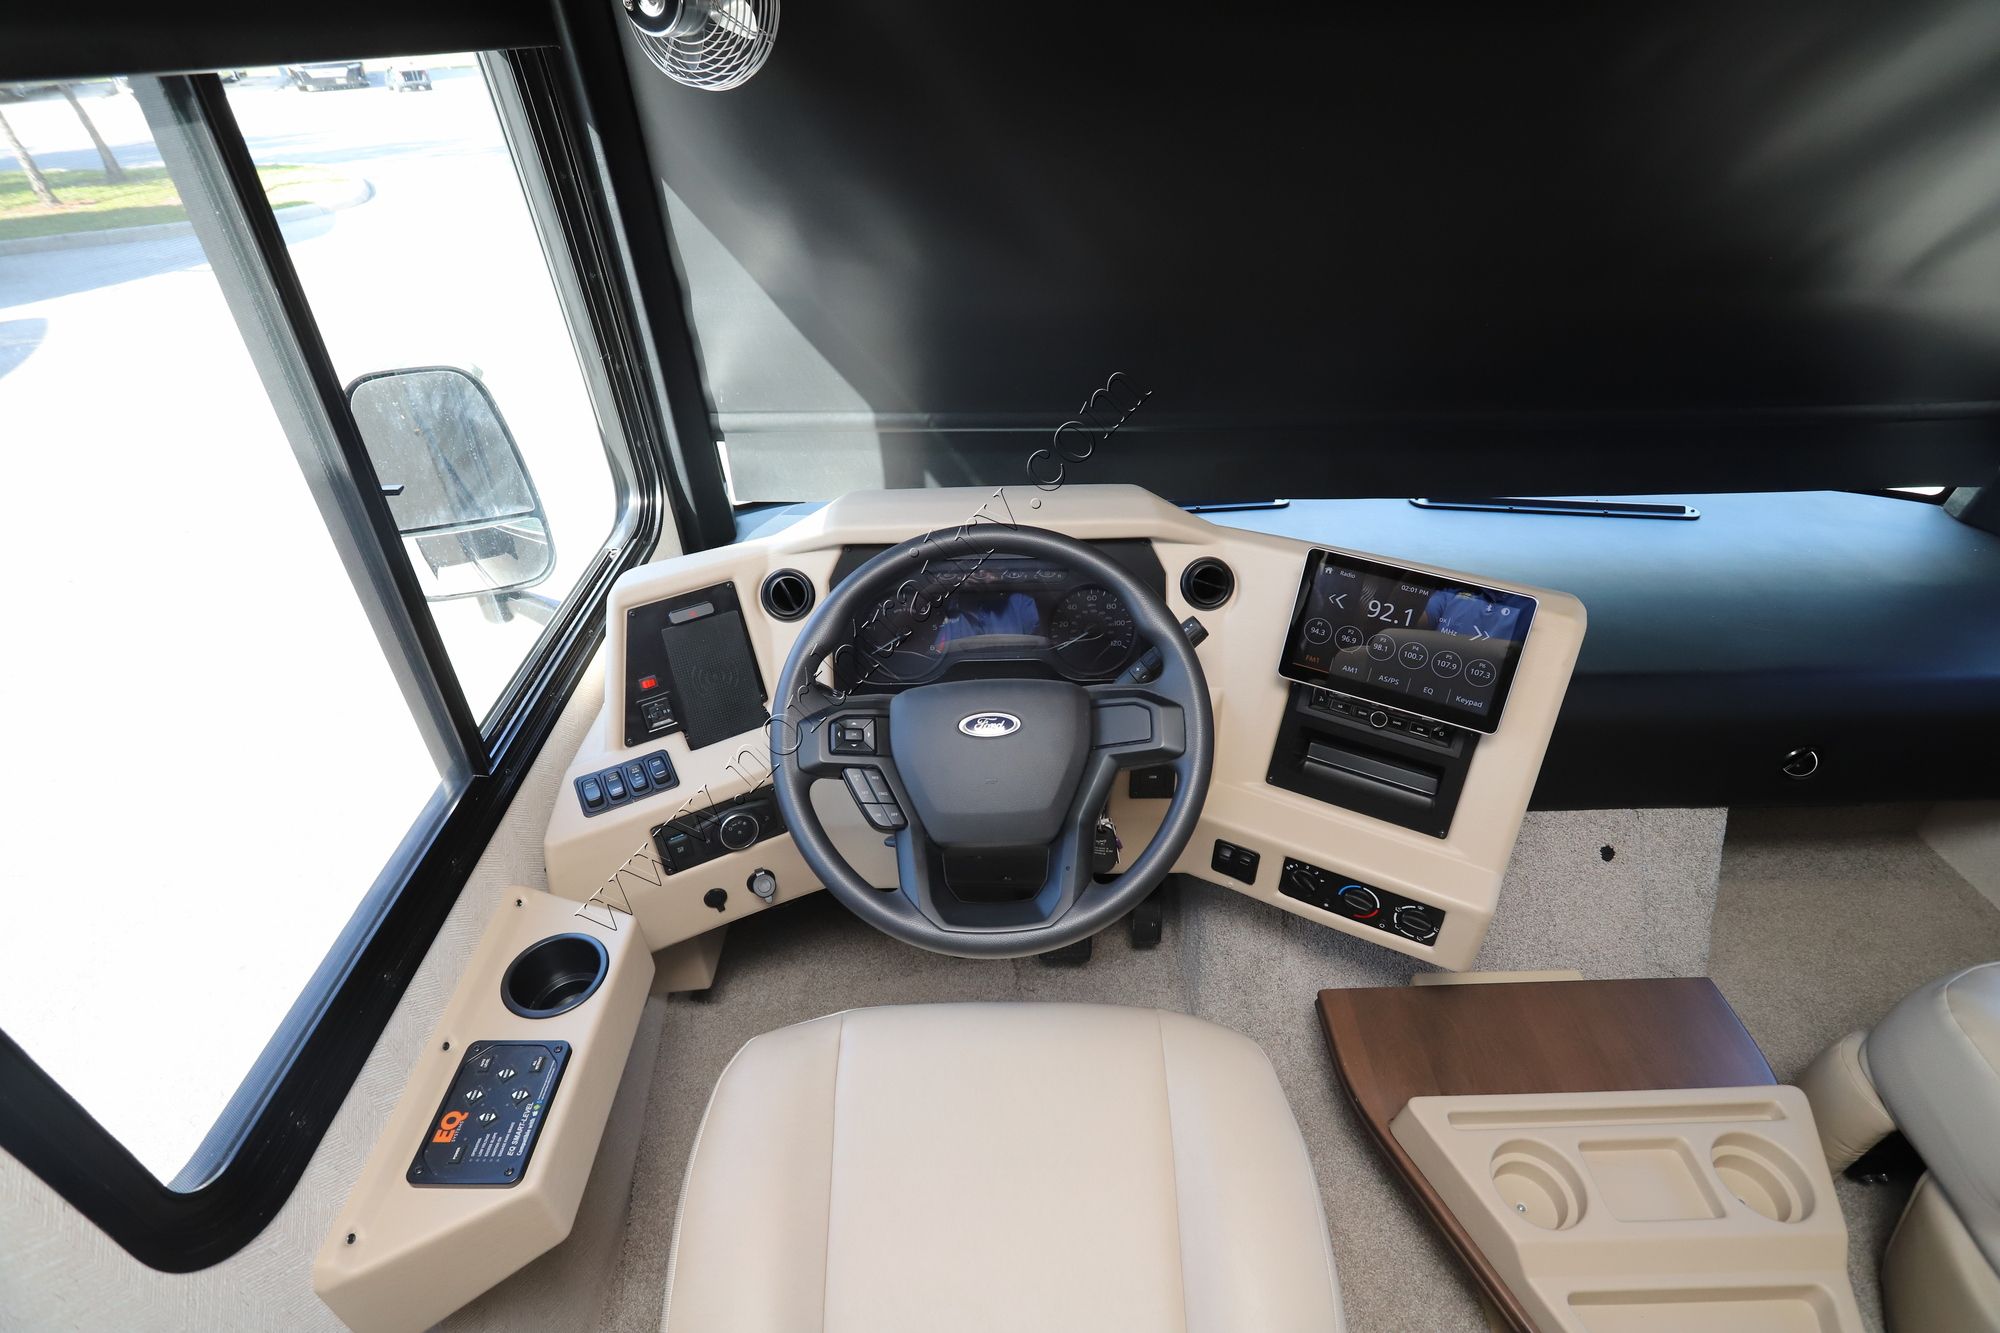 New 2023 Newmar Bay Star Sport 3315 Class A  For Sale